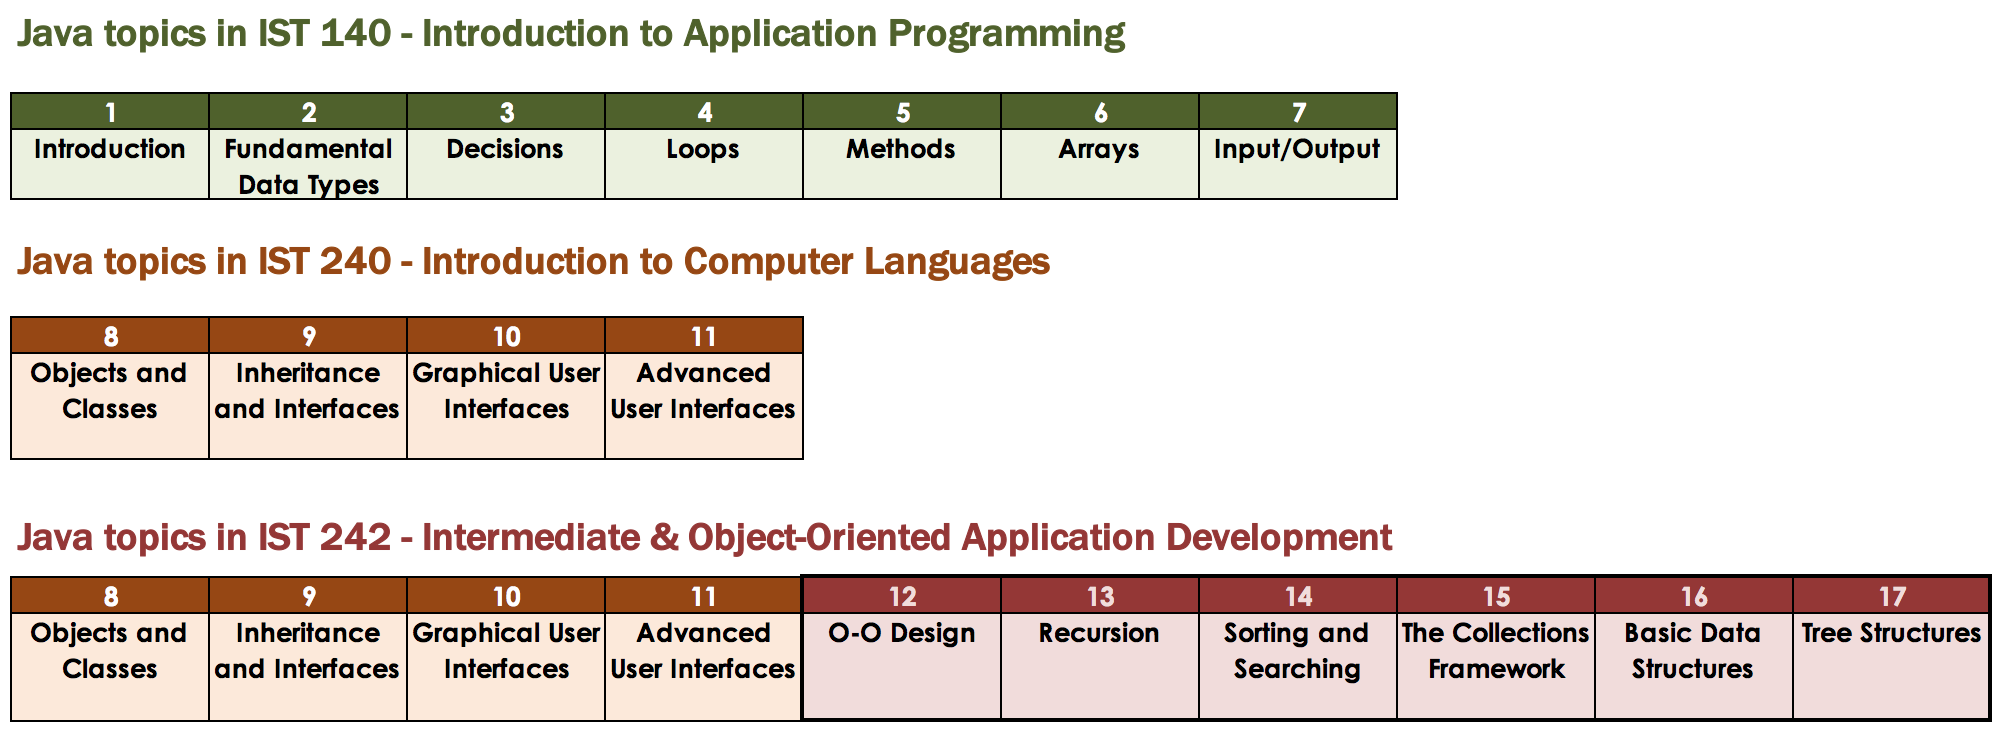 Prerequisites and topics for 242 include: IST 140 - Introduction to Application Programming, IST 240 - Introduction to Computer Languages, and IST 242 - Intermediate & Object-Oriented Application Development